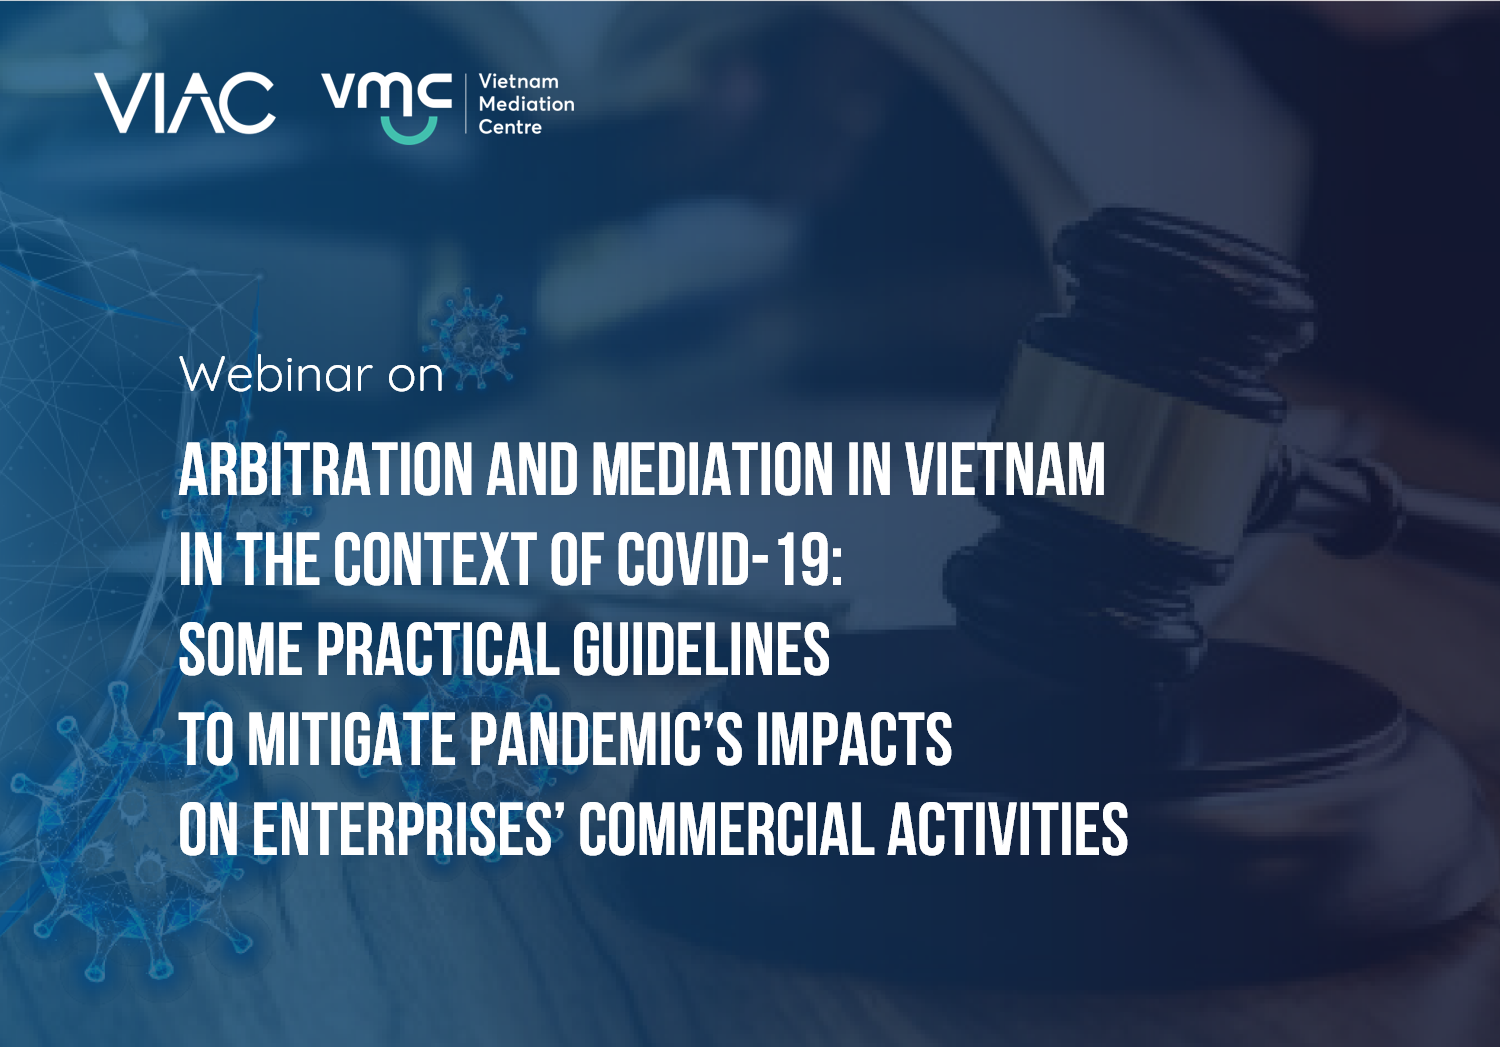 Webinar on Arbitration and Mediation in Vietnam in the context of Covid-19: Some practical guidelines to mitigate Pandemic’s impacts on enterprises’ commercial activities